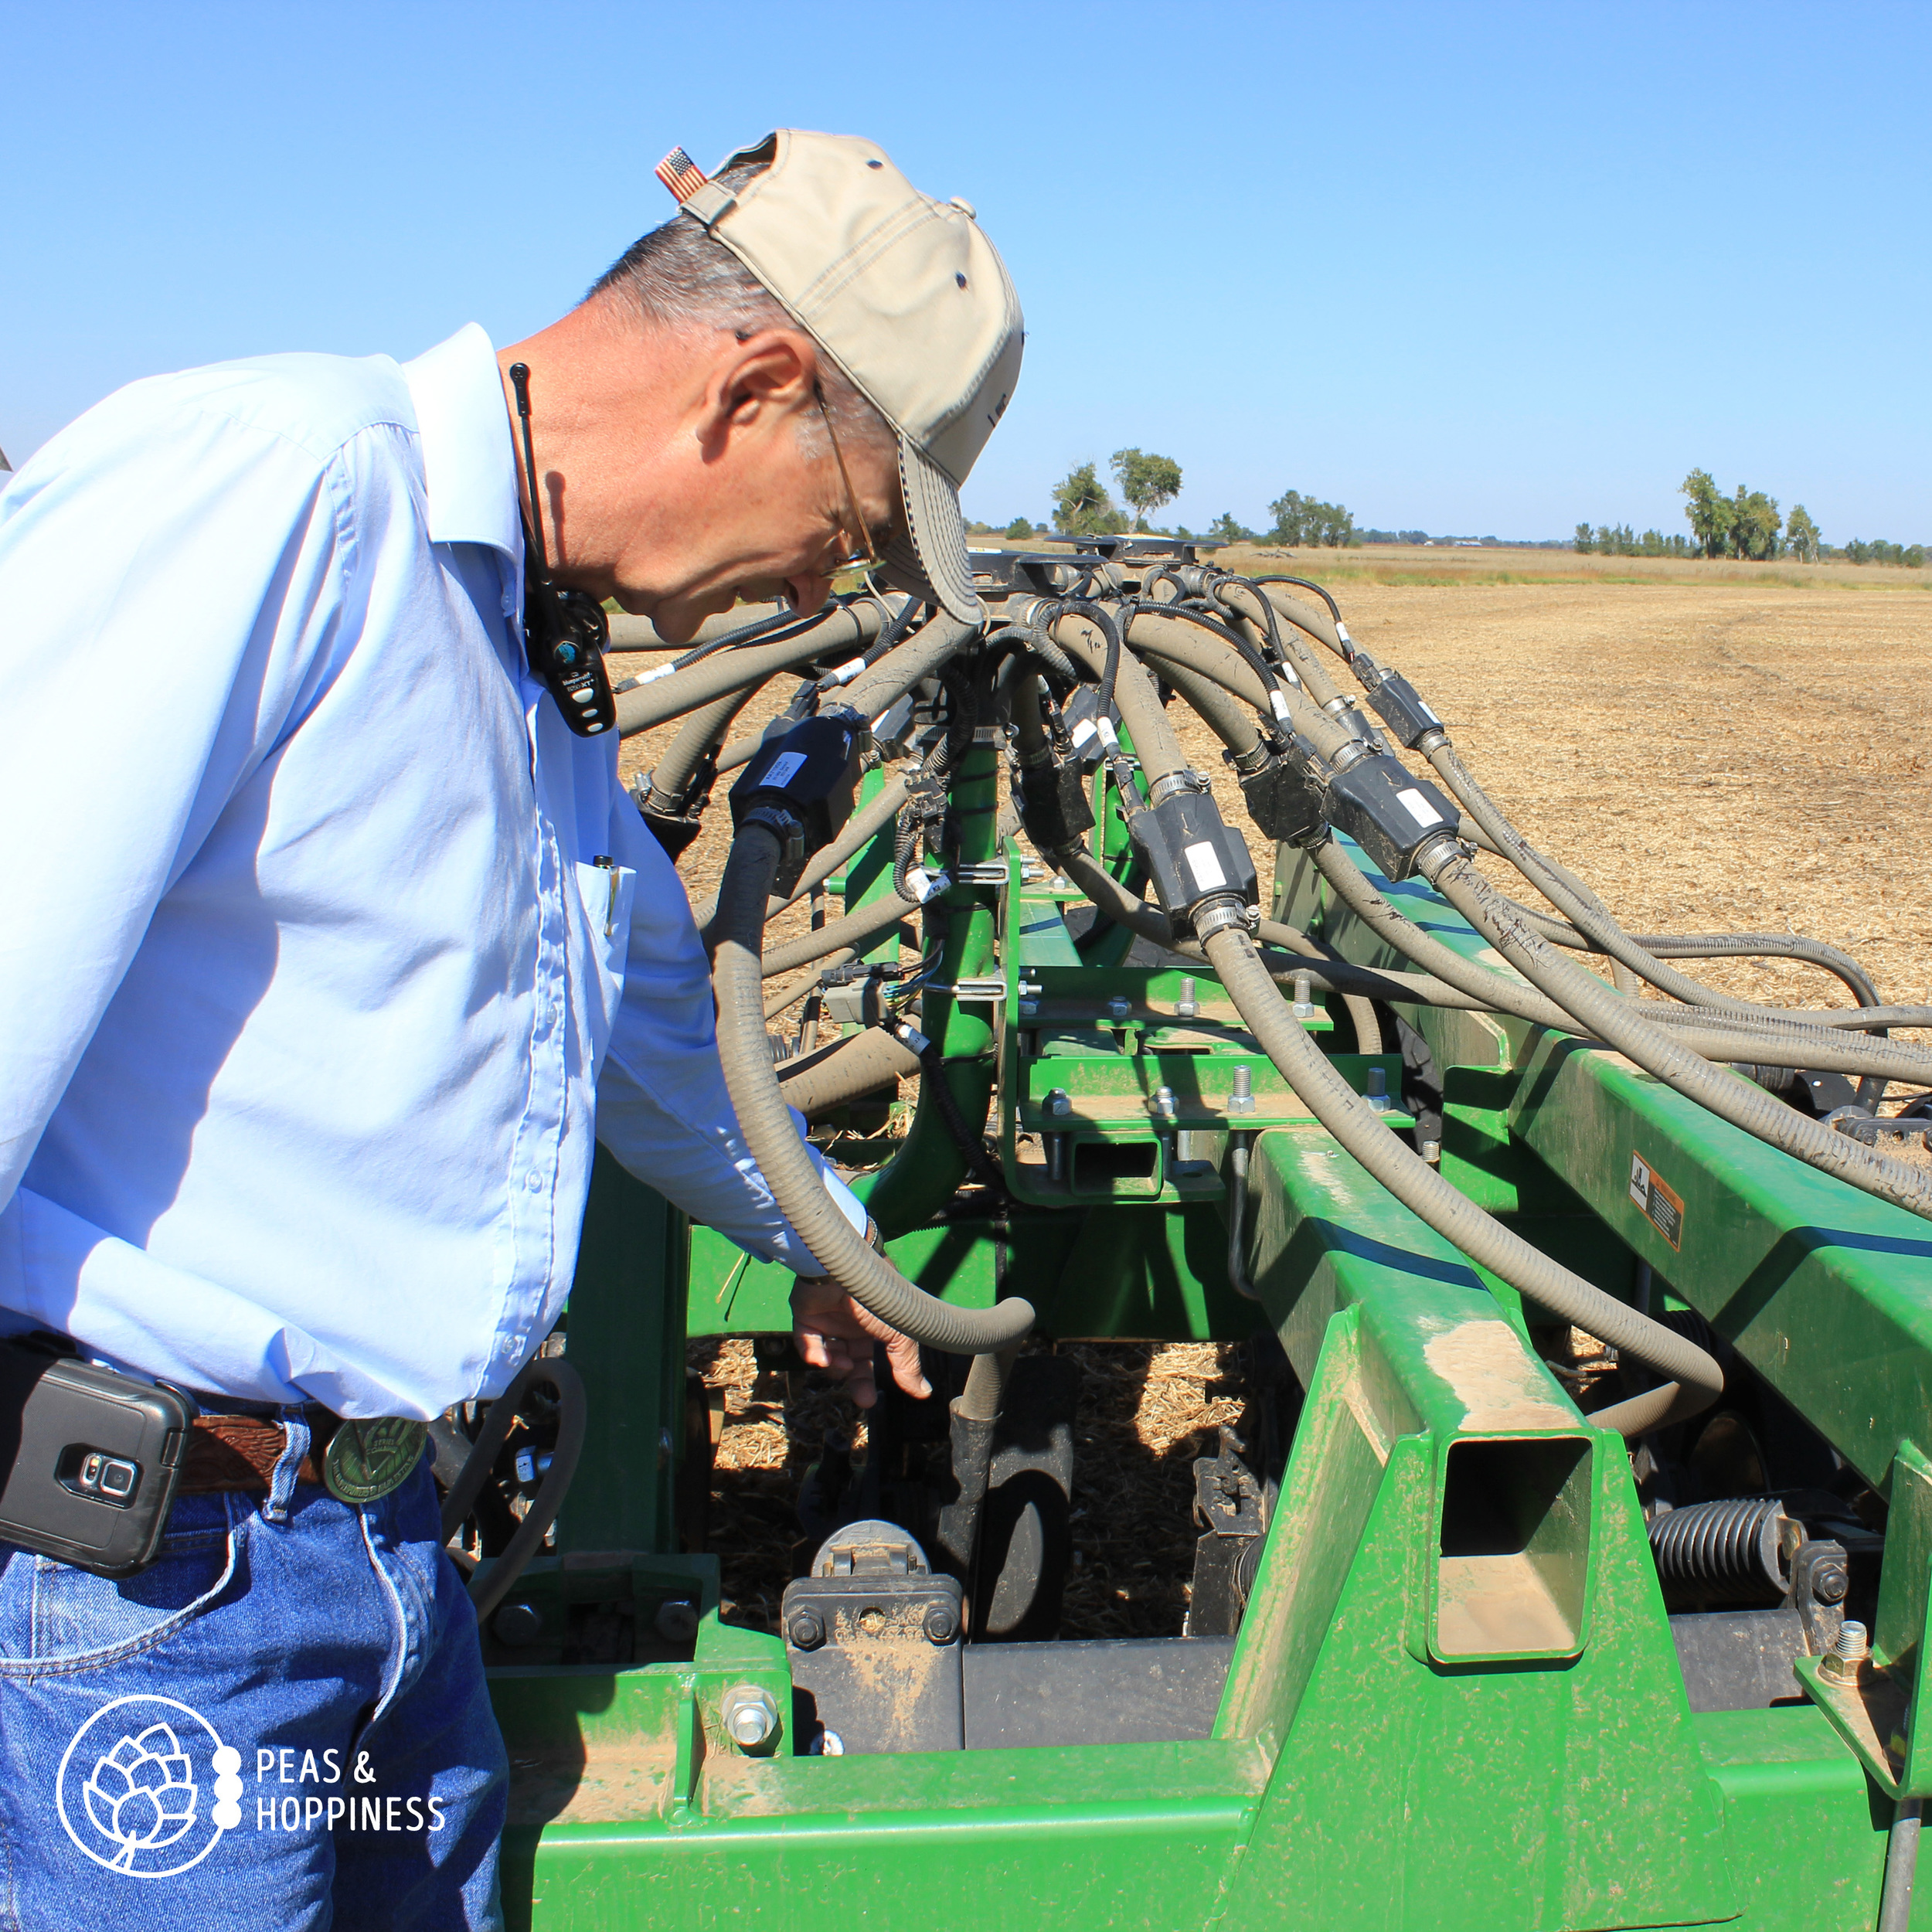 Dad (Lee) explains how the air seeder works - using air pressure to push a wheat kernel underground, followed by a heavy disc that cuts through last season's residue to place dry fertilizer under the ground next to the seed